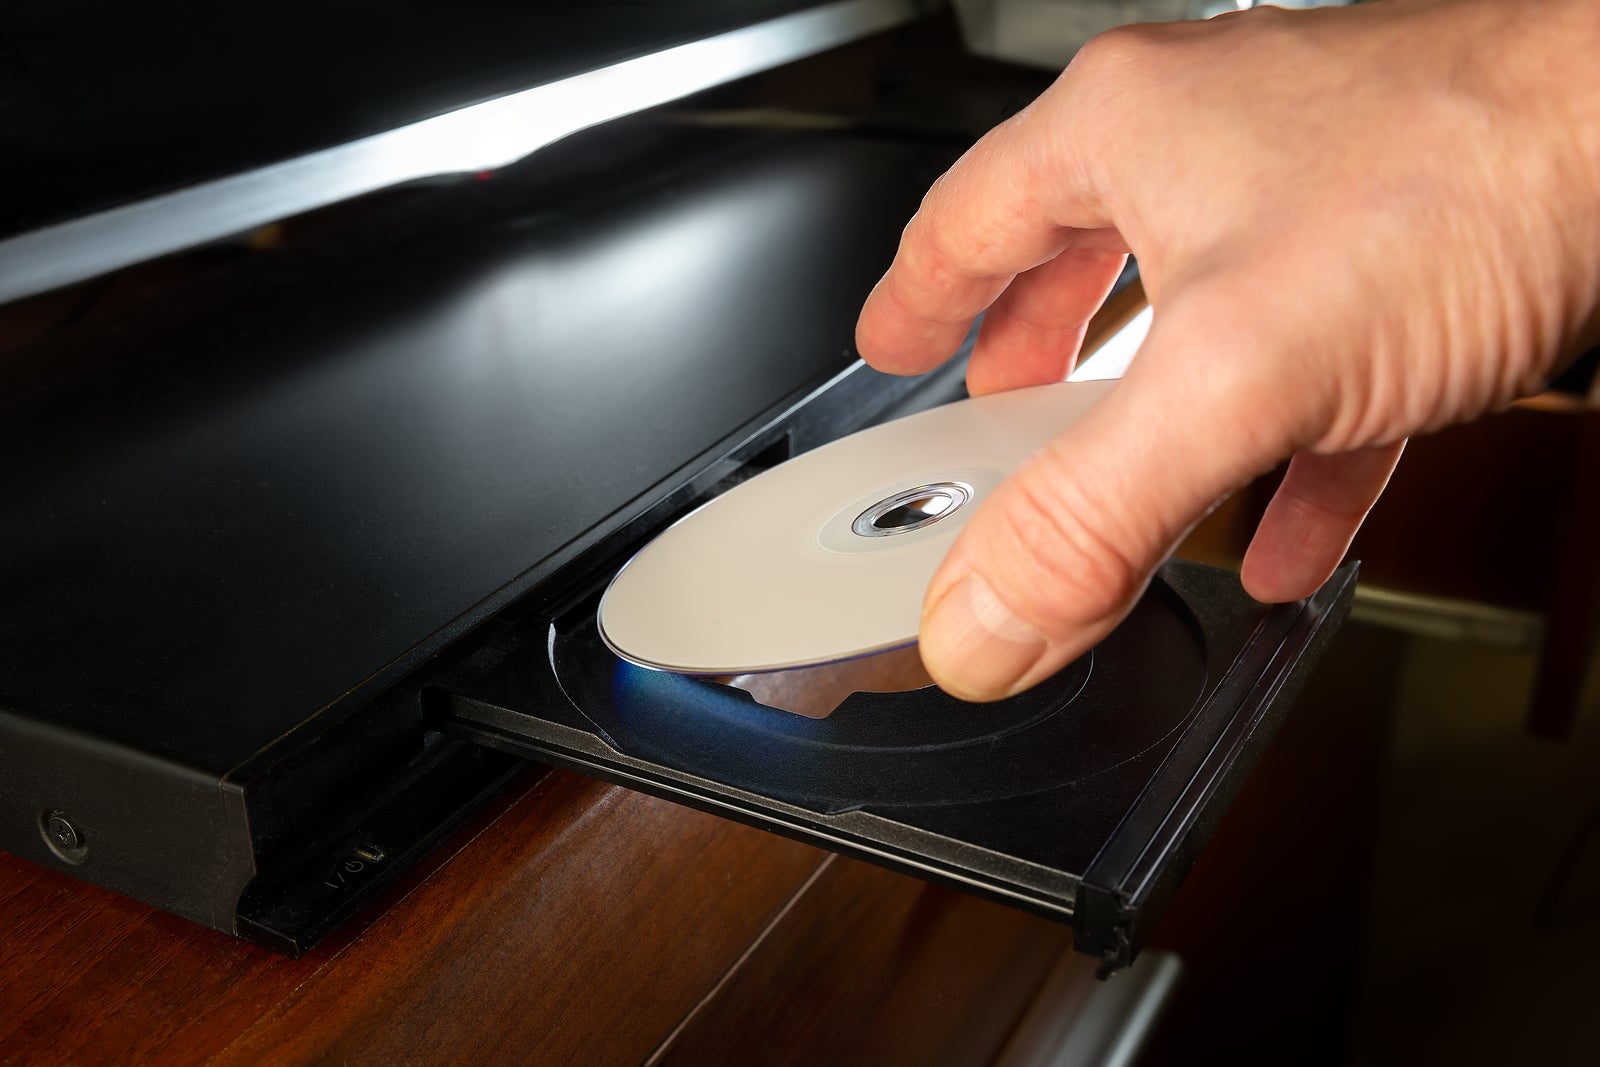 hand holding dvd-disk insert to dvd player